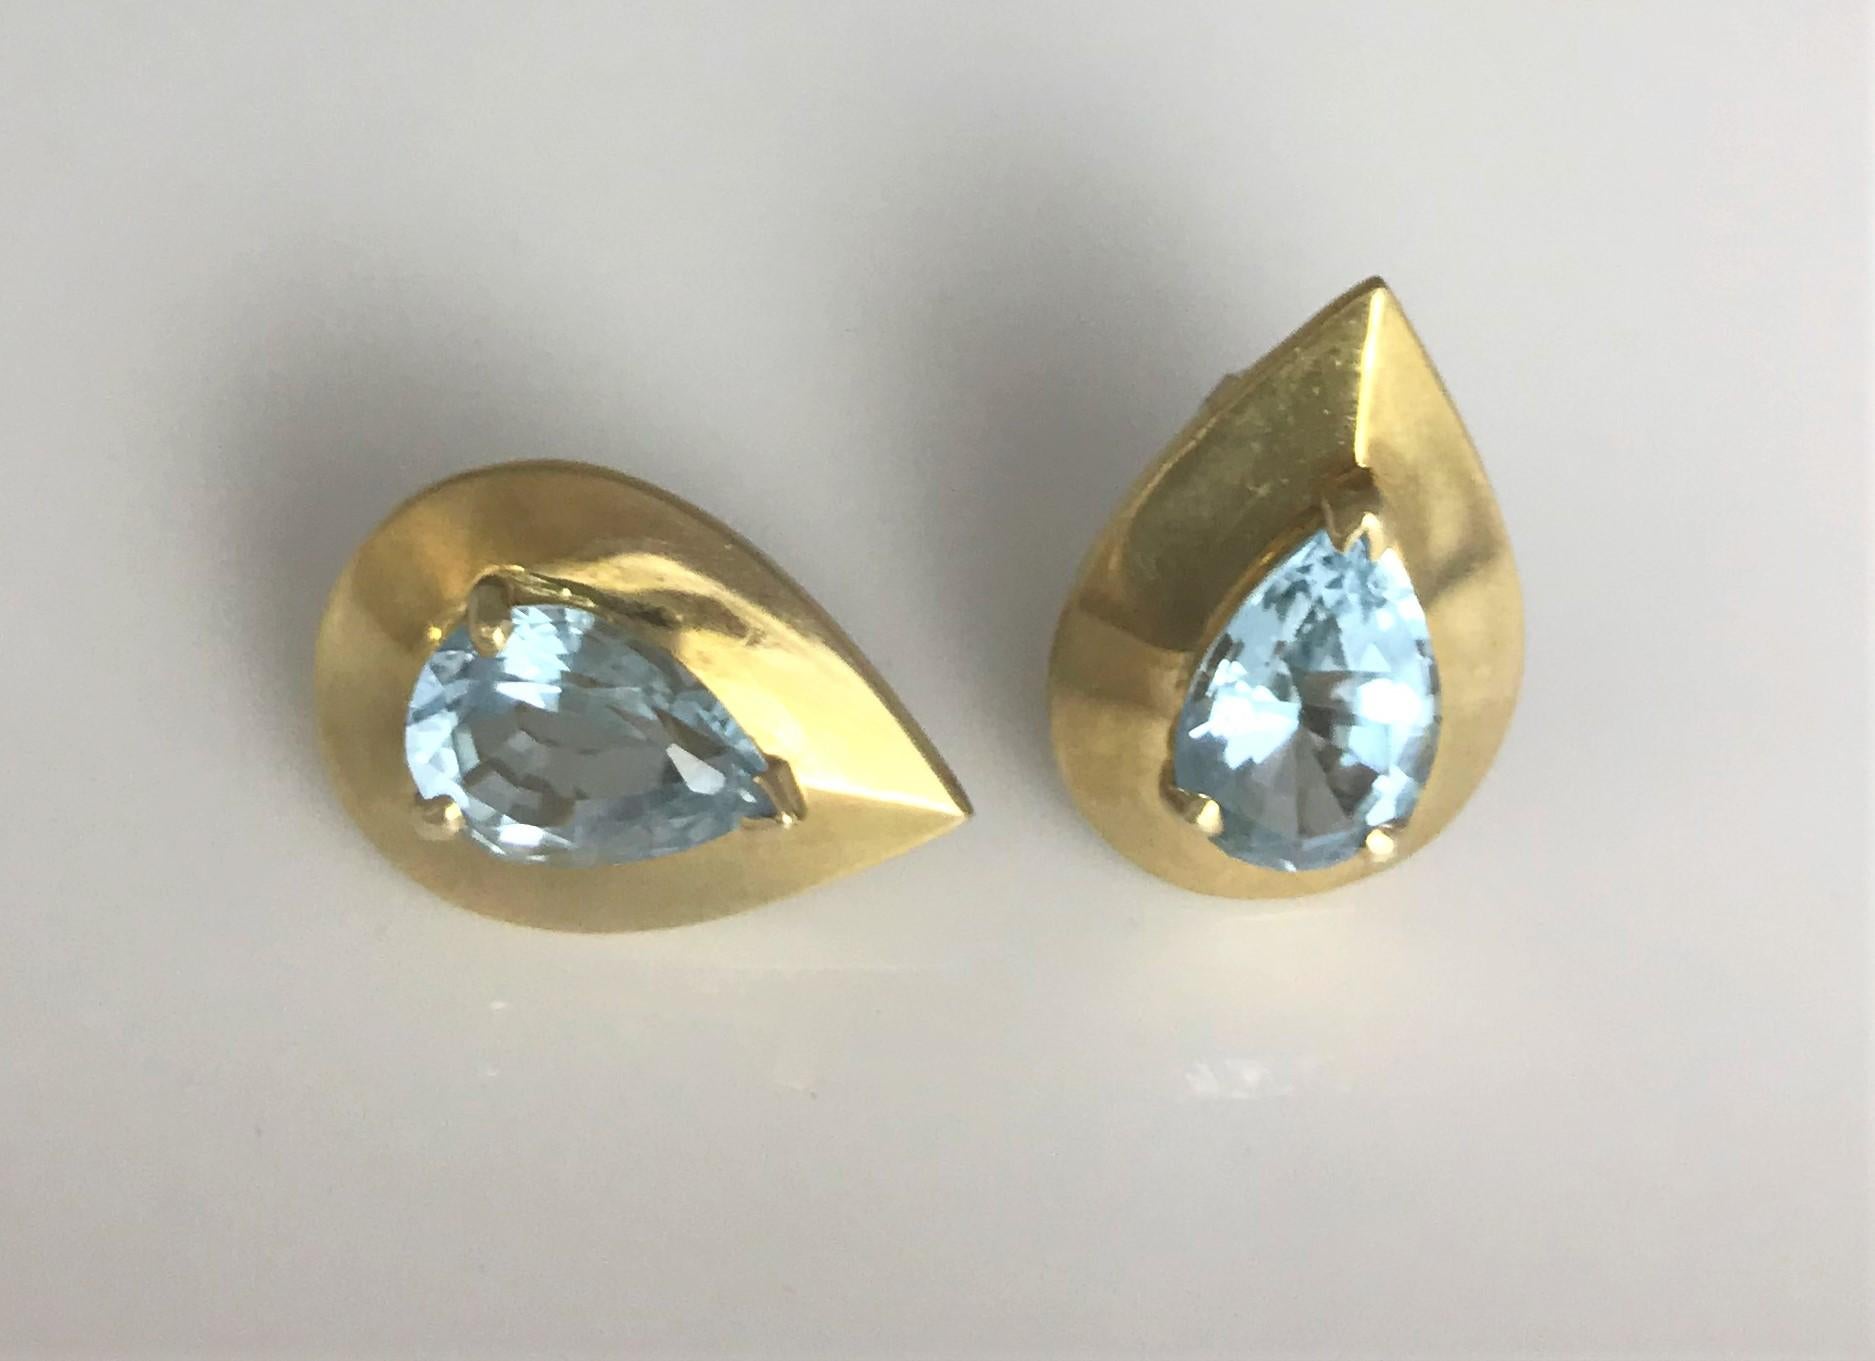 These are something to enjoy every day...a wear-with-anything pair of earrings!
14 karat yellow gold pear shape mounting
Light blue pear shape topaz approximately 12.5mm x 8.0mm x 5.4mm
Omega clip backs (post could be added)
Approximately overall